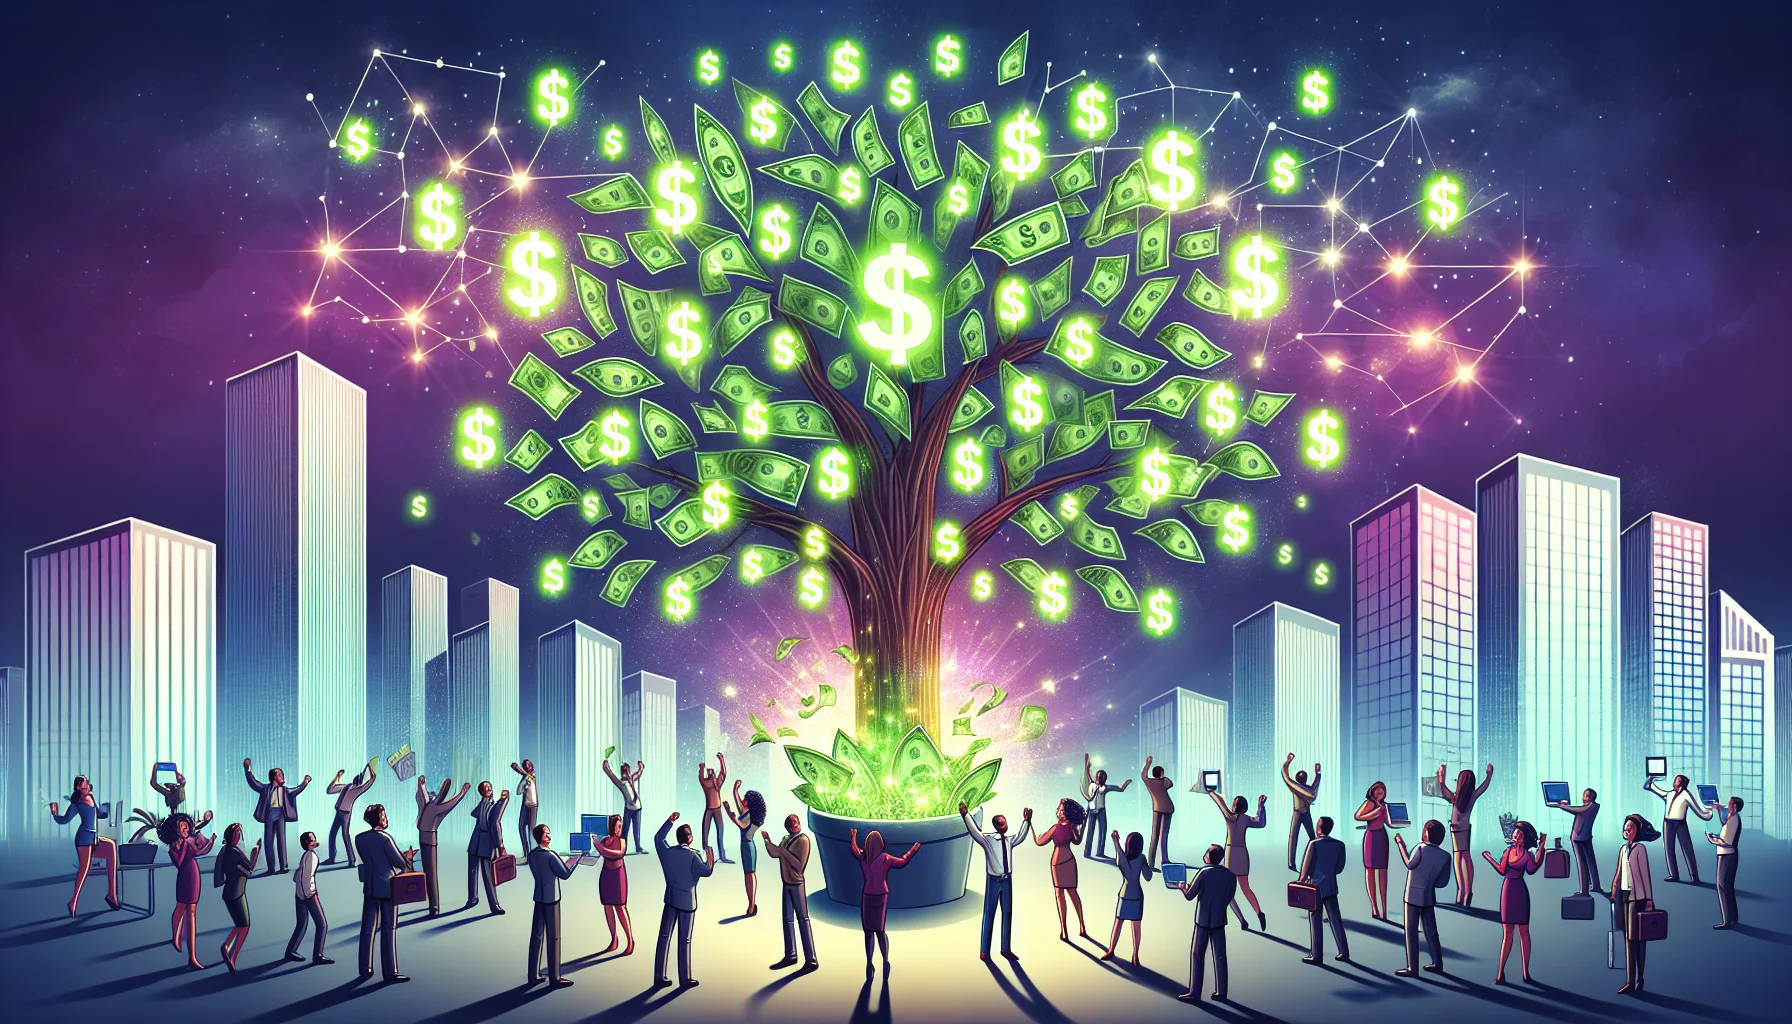 Create an image set in a whimsical, cartoon-like depiction of the digital world. In the foreground, visualize a stylized tree made of glowing, green dollar bills blossoming from the branches. Around this, depict a group of diverse people of different genders and descents excitedly gathering. They represent the online market affiliates, each holding a electronic device signifying their connection to the online world where they make their earnings. In the background, illustrate sleek skyscrapers, symbols of economy and wealth, digitally emerging from a vibrant network of interconnected nodes, representing the worldwide web and online money-making potential.